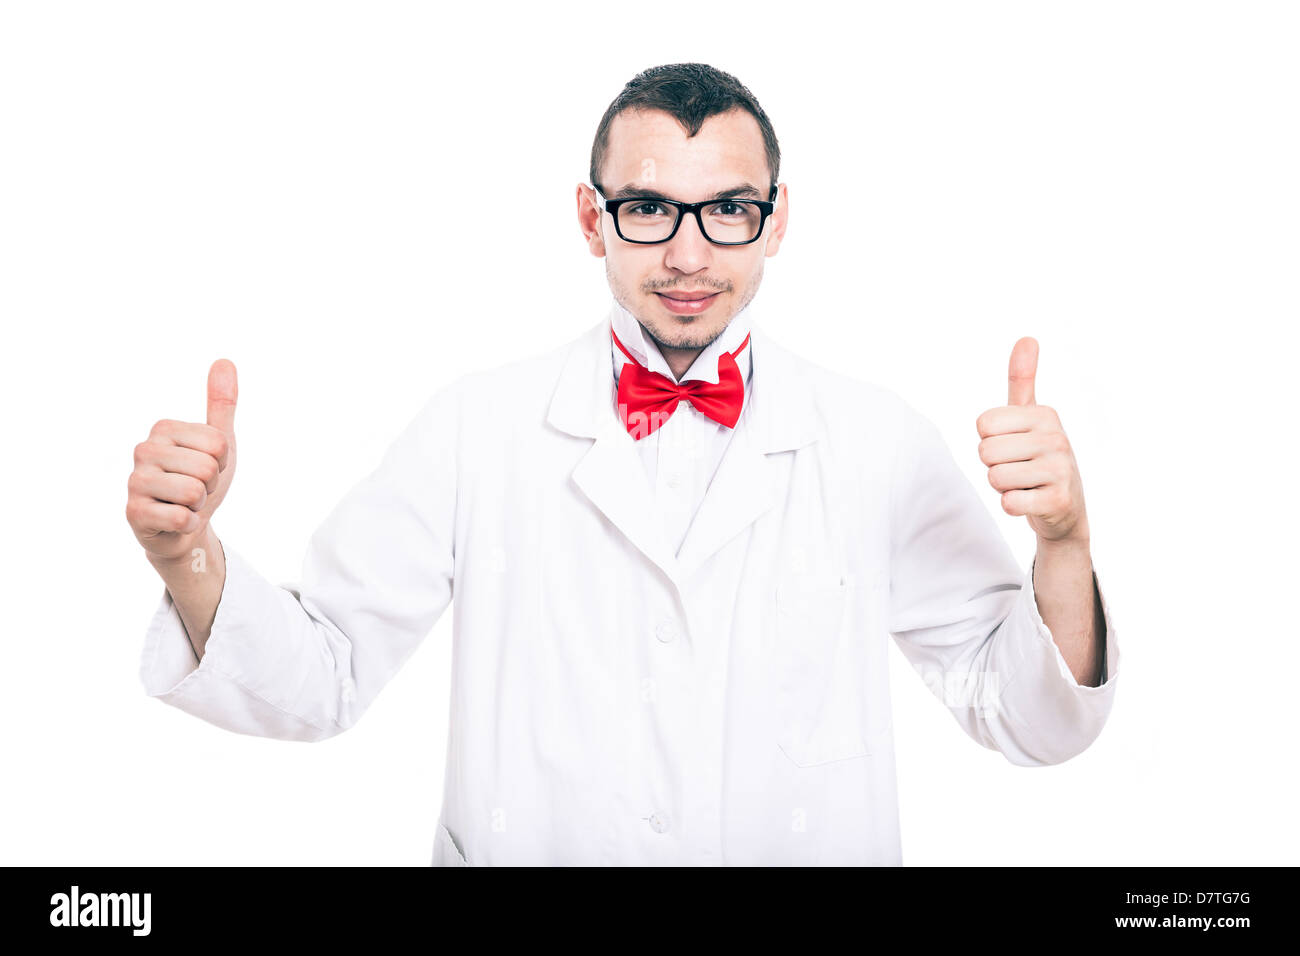 Happy scientist in lab coat showing thumbs up, isolated on white background Stock Photo